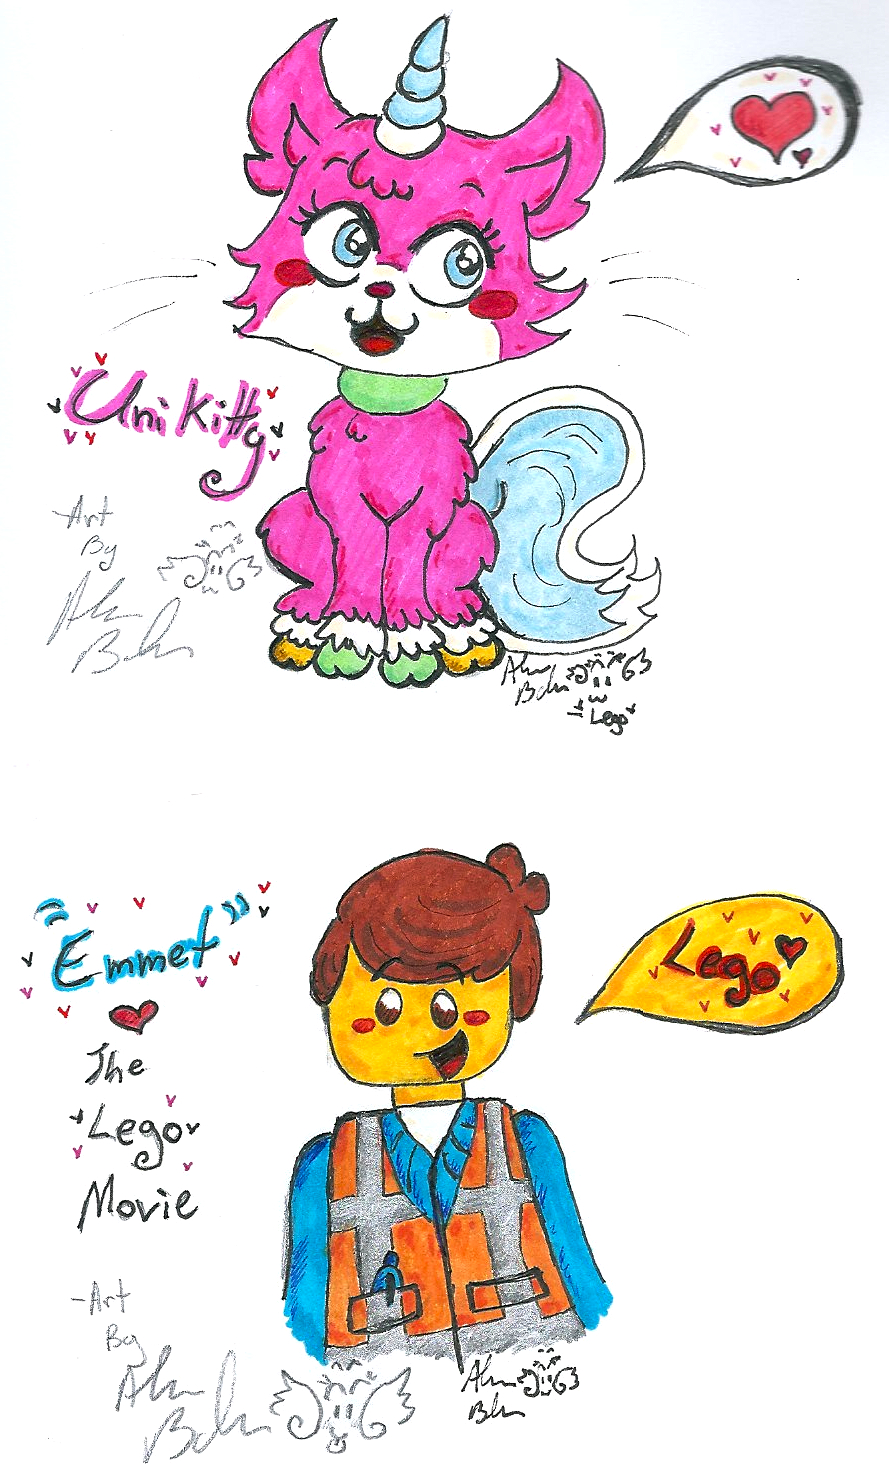 The Lego Movie Art by Kittychan2005